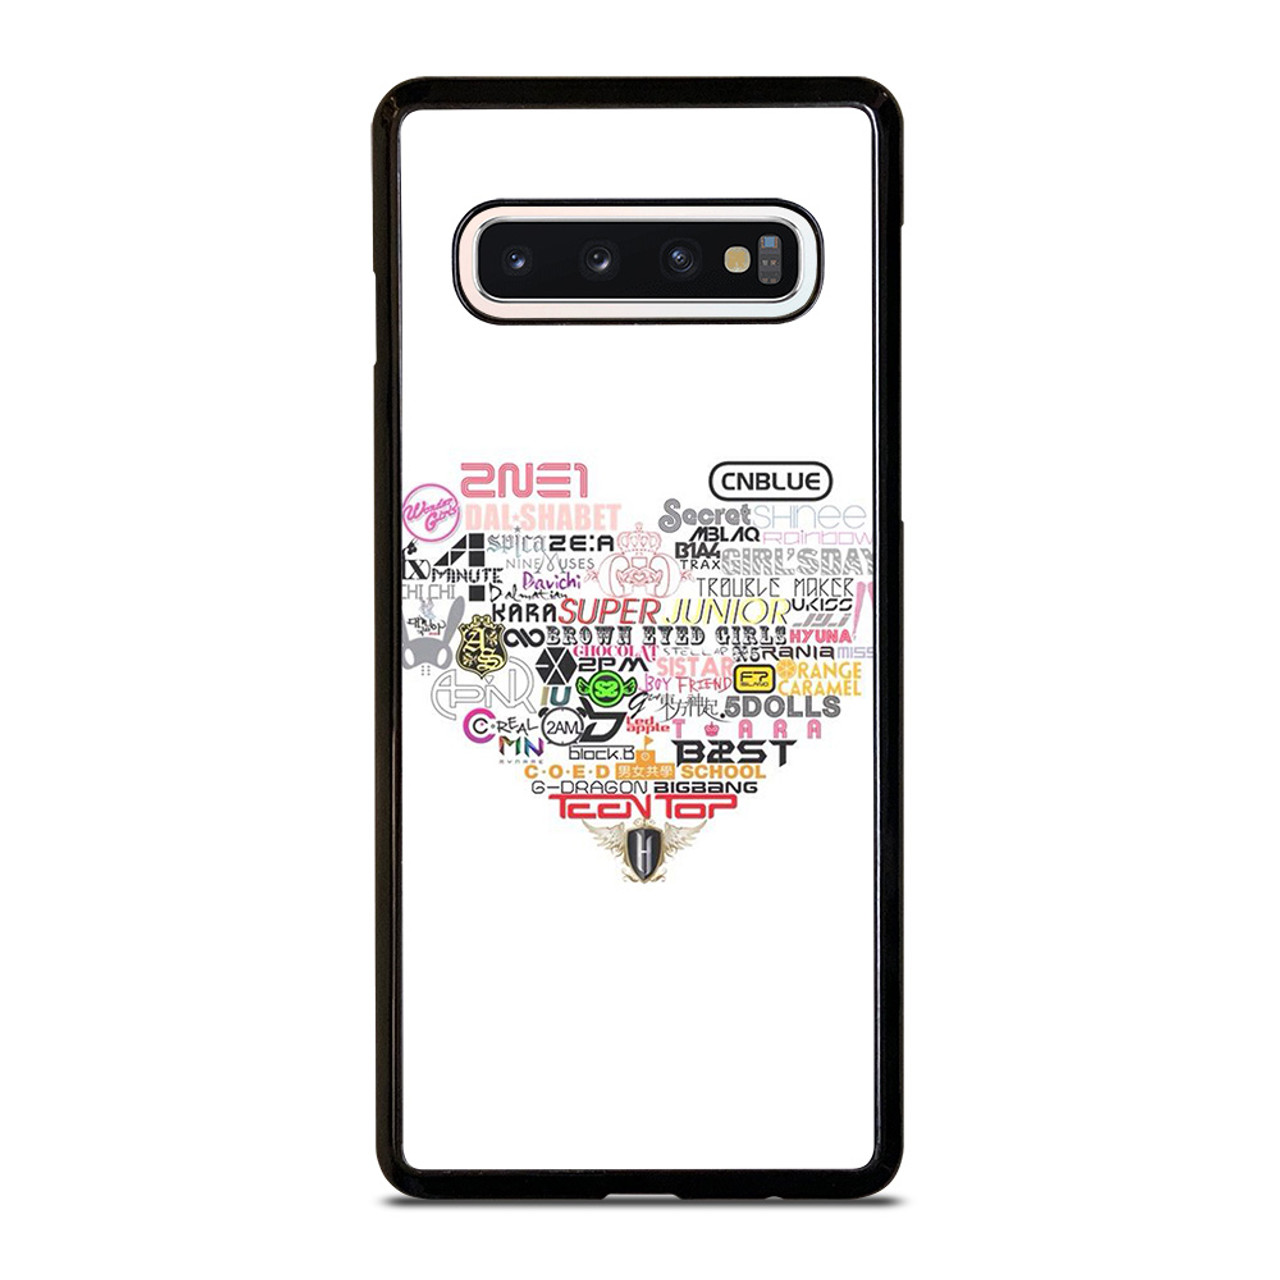 KPOP ALL BAND LOVE Samsung Galaxy S10 Case Cover